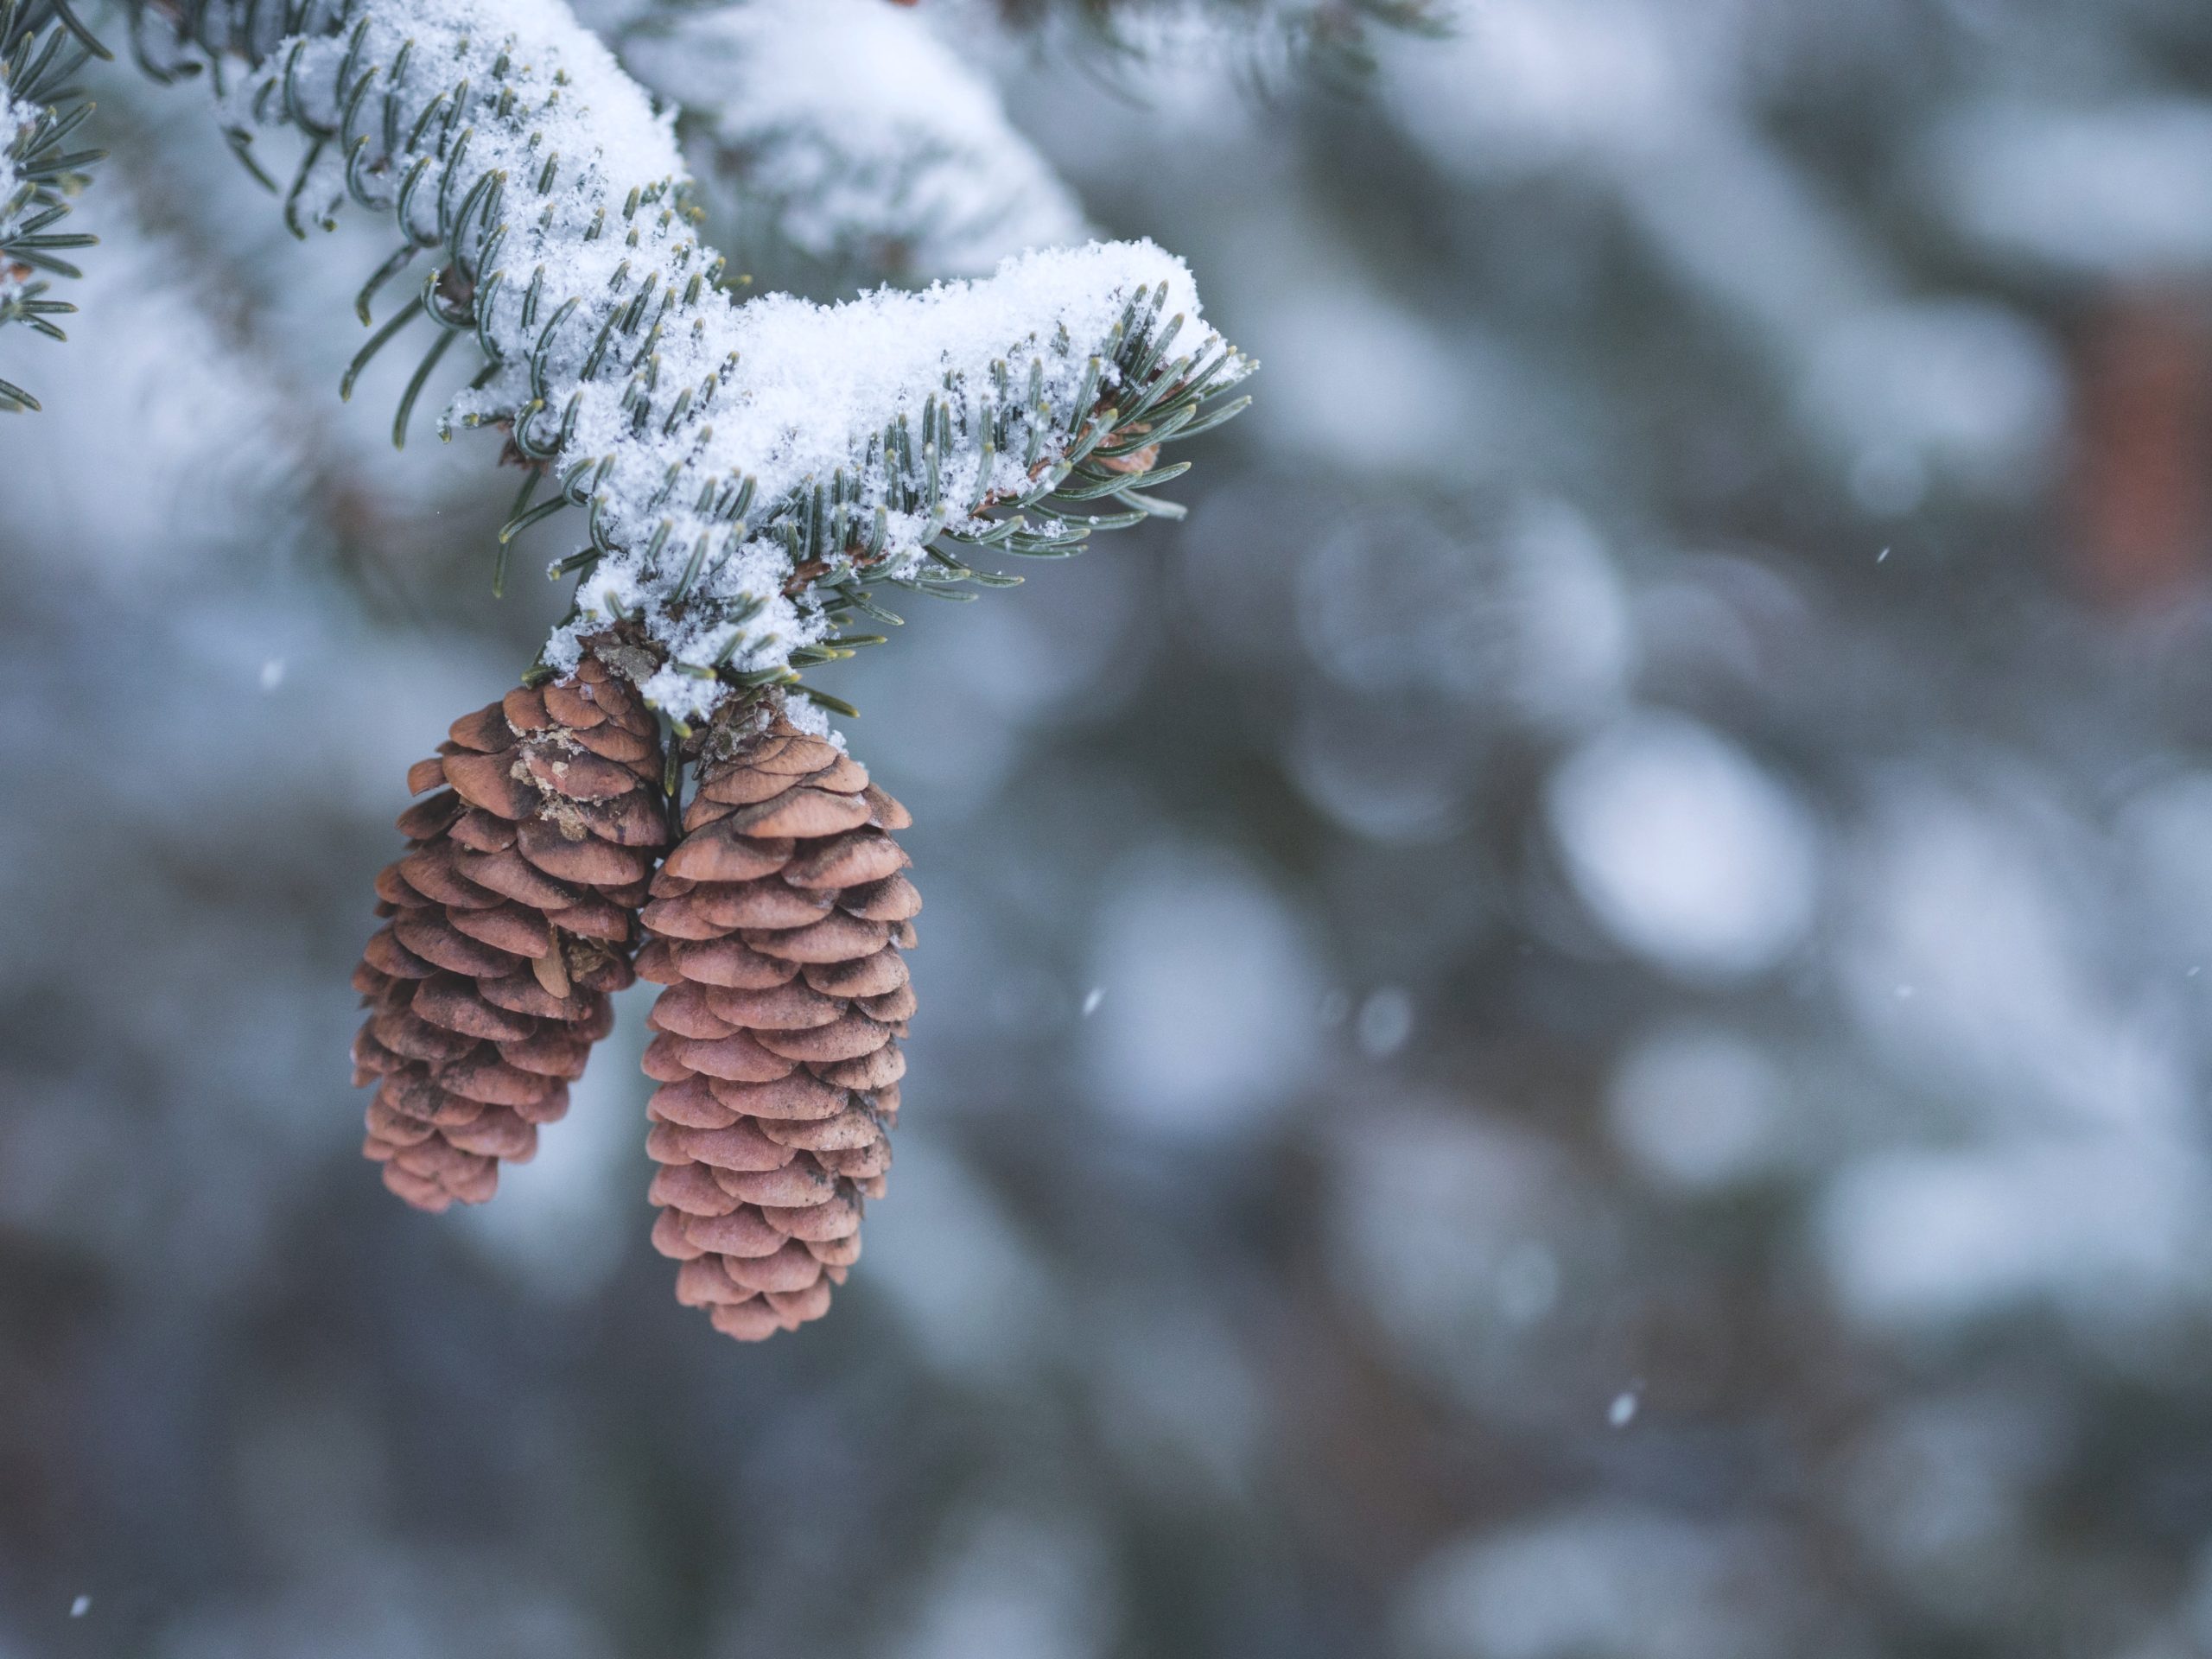 Two pine cones hanging on pine tree